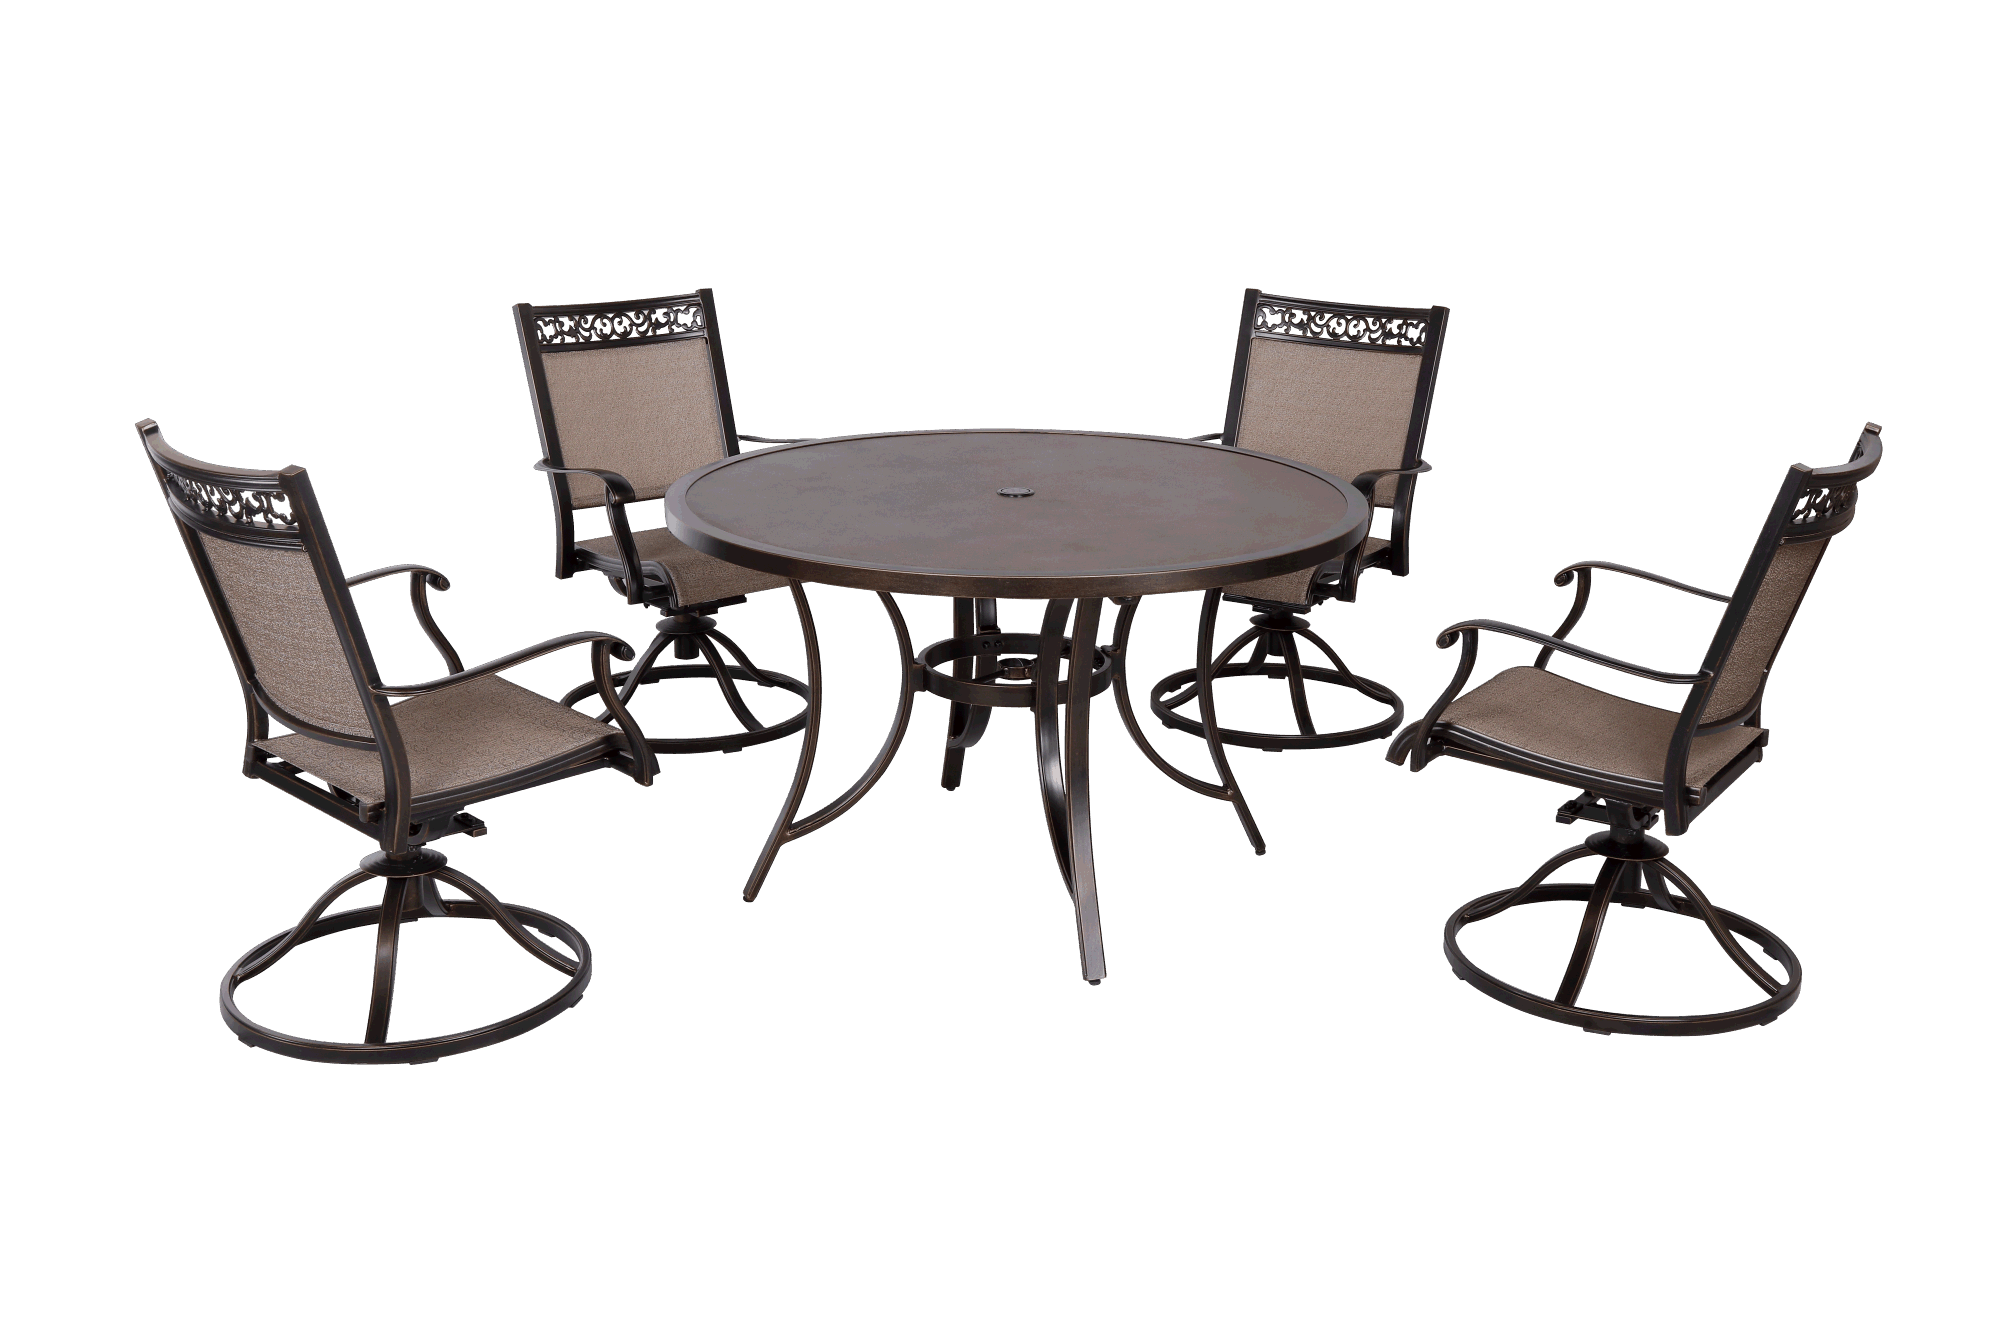 [PICK UP ONLY]Outdoor 5 Piece Dining Set Patio Furniture w/ Aluminum Swivel Rocker Sling Chair Set 4pcs & 48inch Tempered Glass Top Table